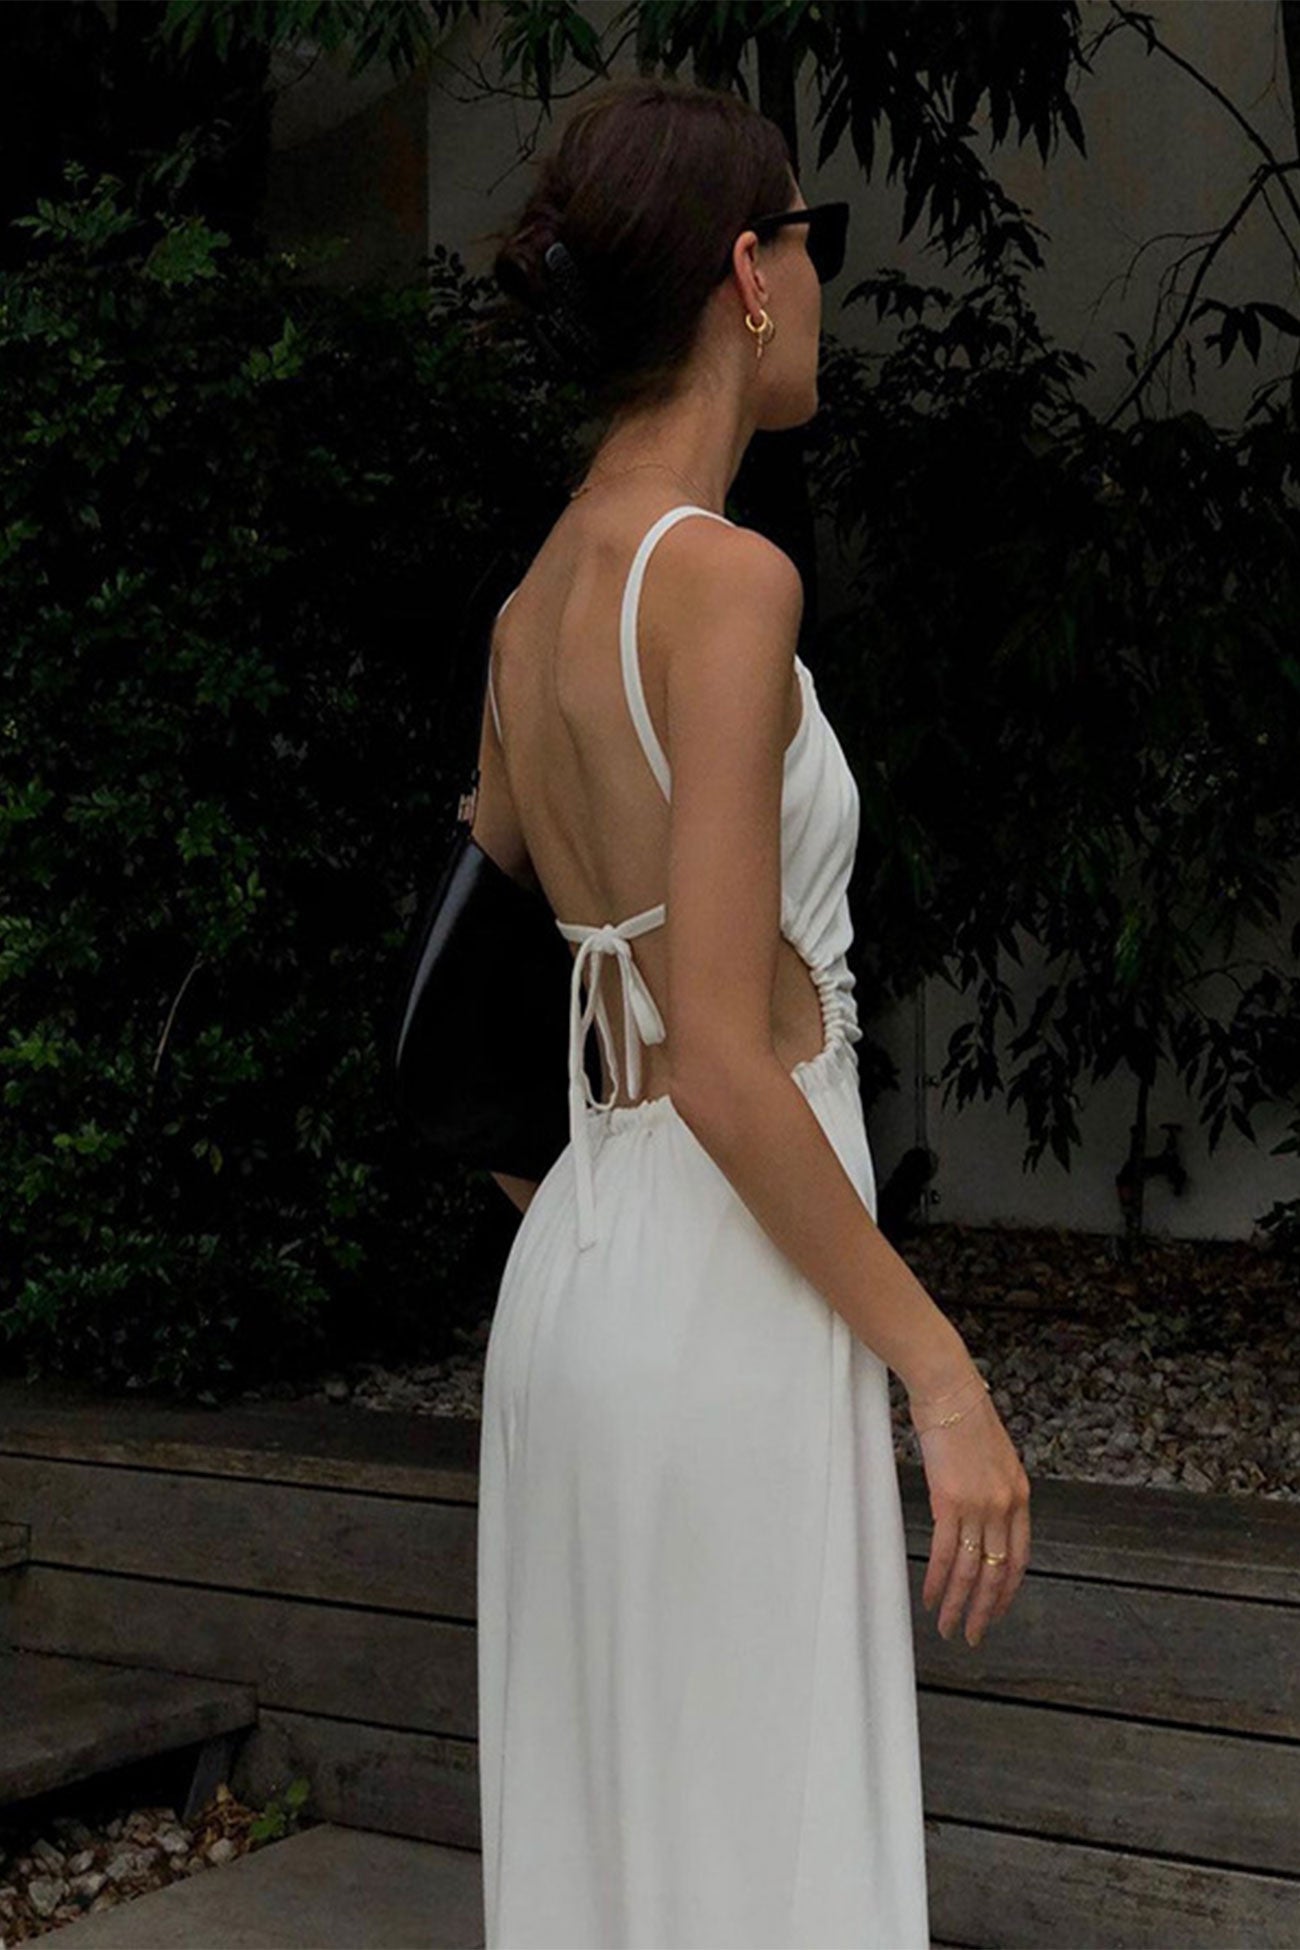 Cut-out Backless Strappy White Dress